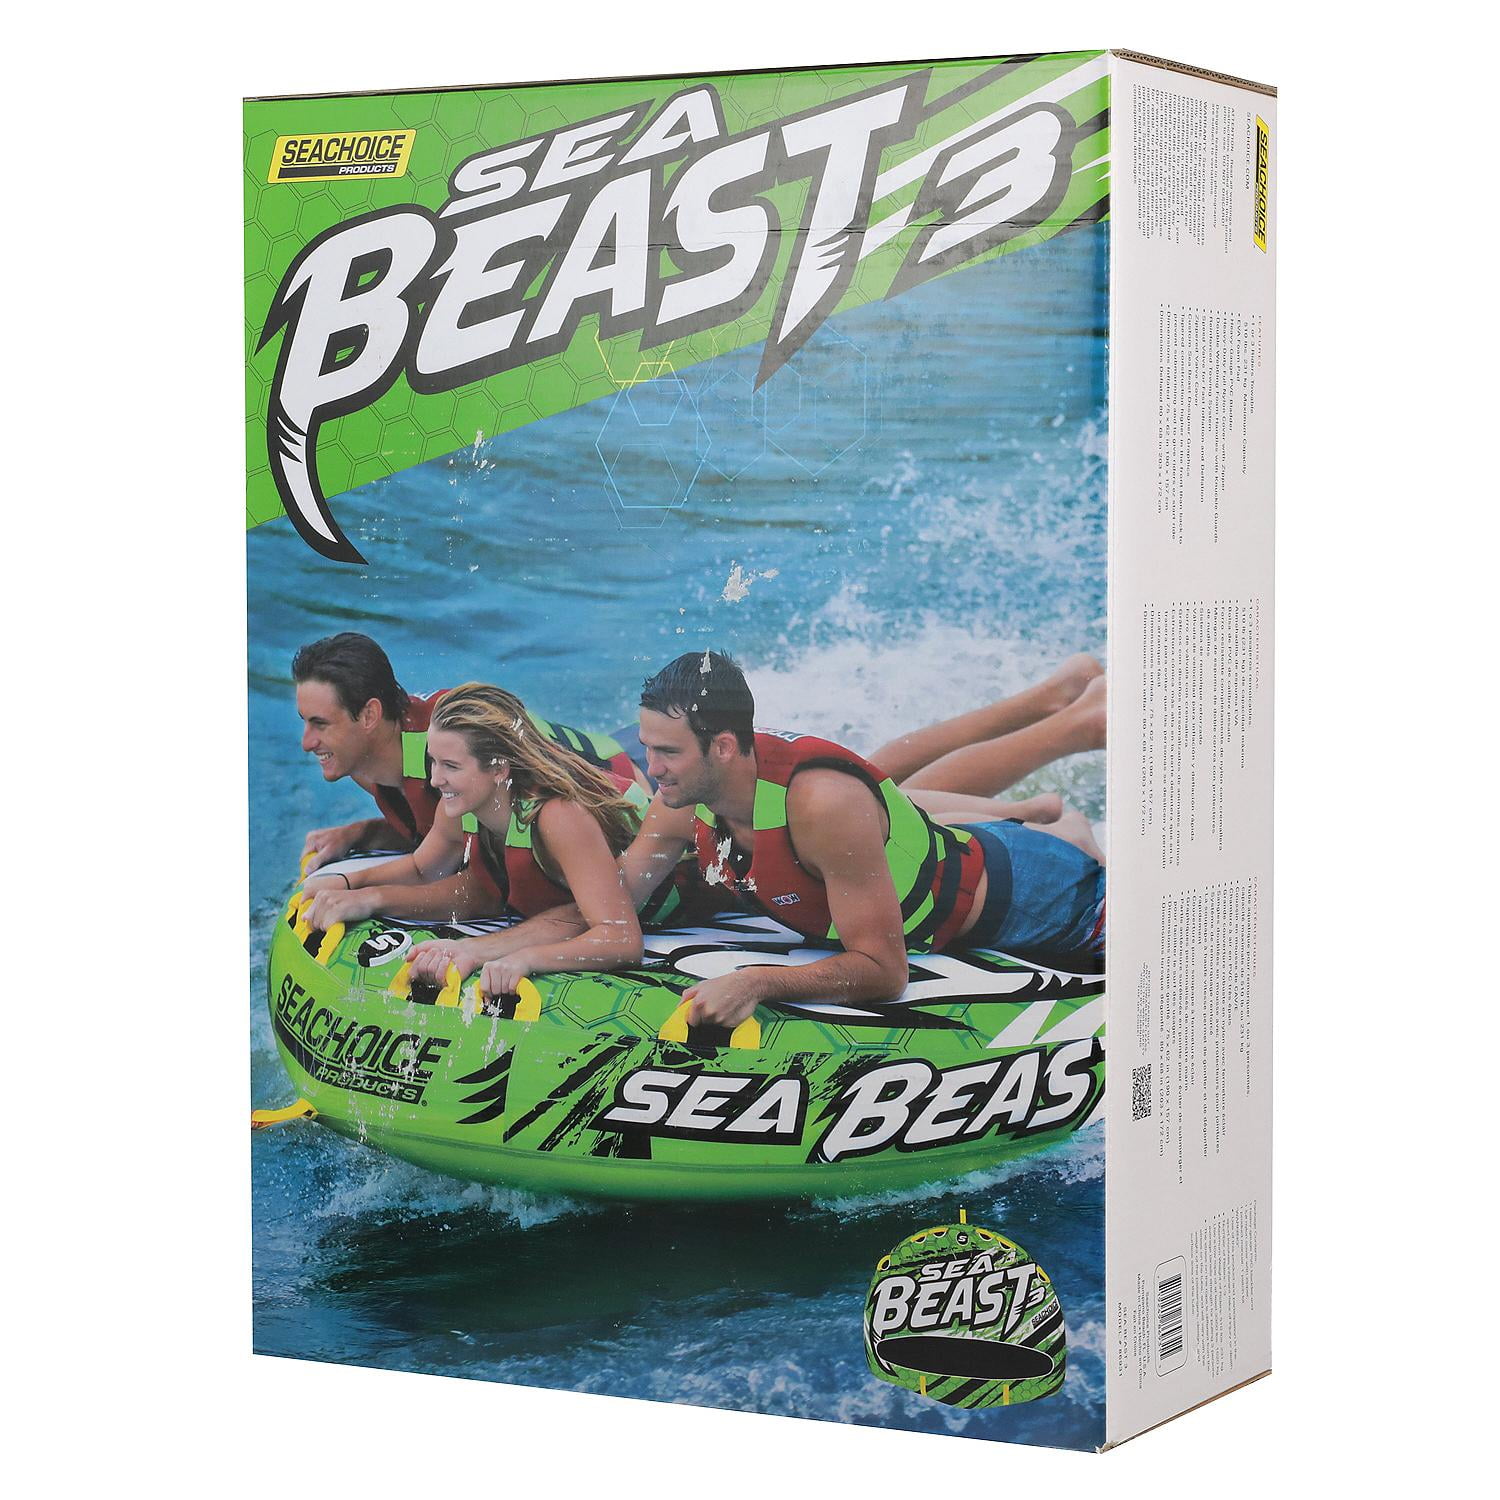 Seachoice 86931 Sea Beast Deck Tube, Reinforced Towing System, for 1 to 3  Riders Up to 510 Pounds, 75x62 inches